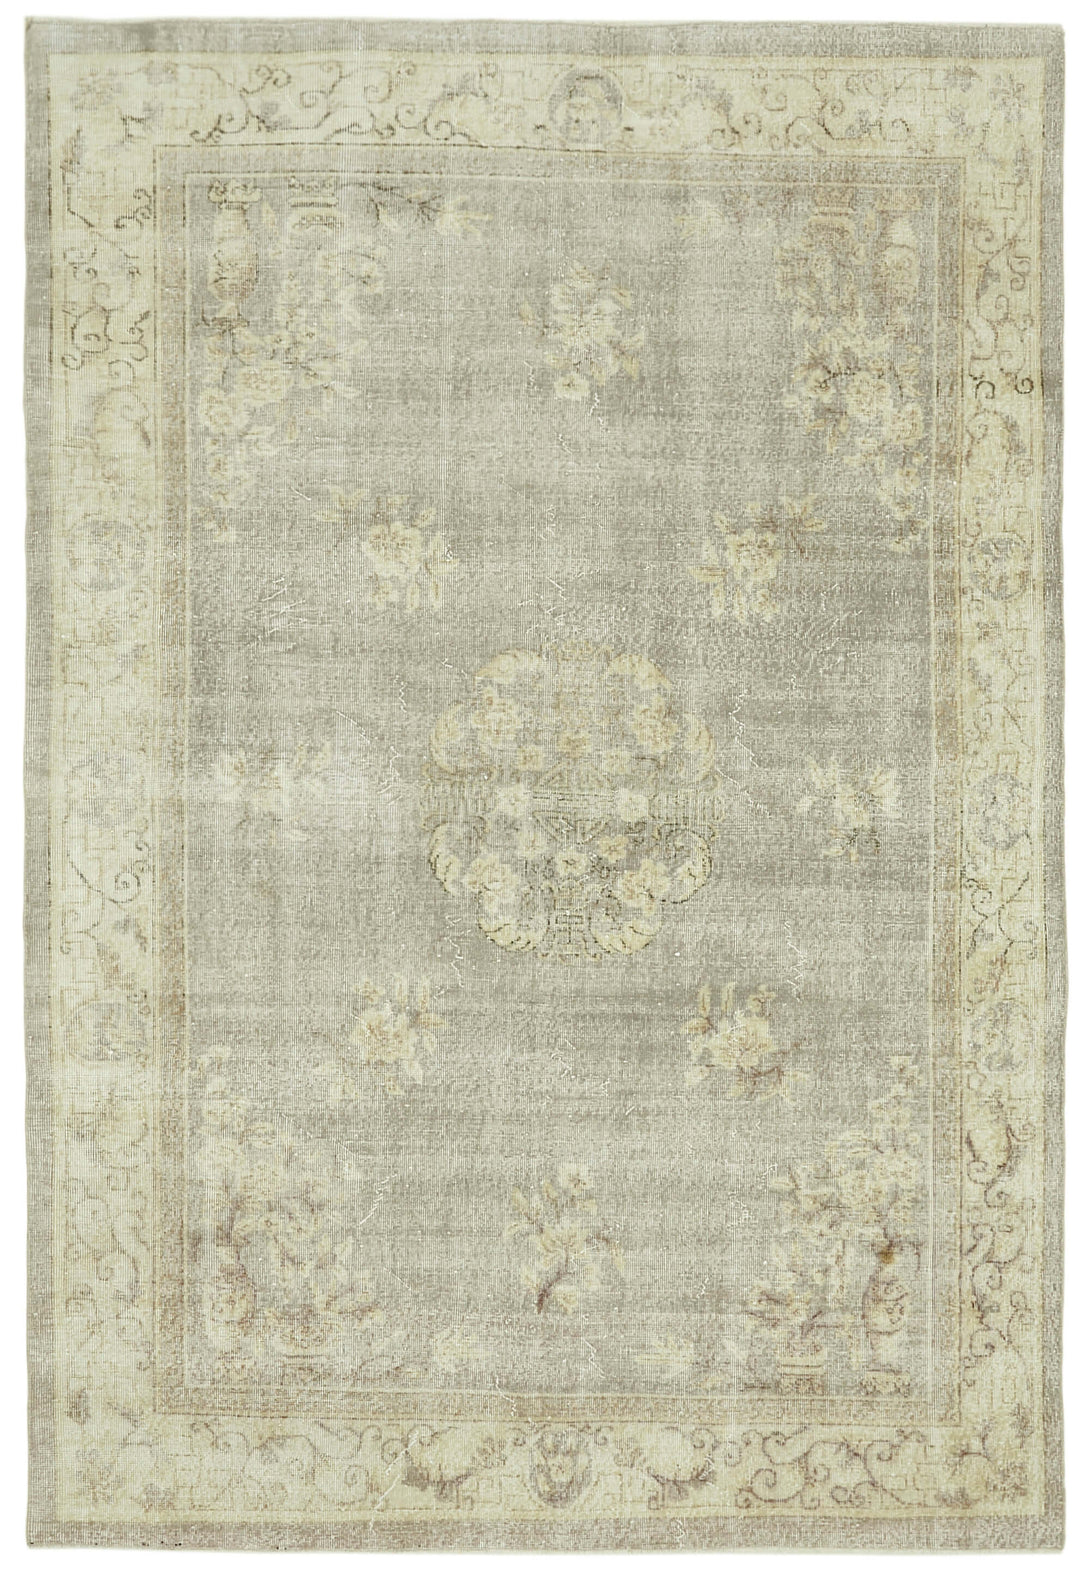 Handmade White Wash Area Rug > Design# OL-AC-41395 > Size: 7'-1" x 10'-4", Carpet Culture Rugs, Handmade Rugs, NYC Rugs, New Rugs, Shop Rugs, Rug Store, Outlet Rugs, SoHo Rugs, Rugs in USA